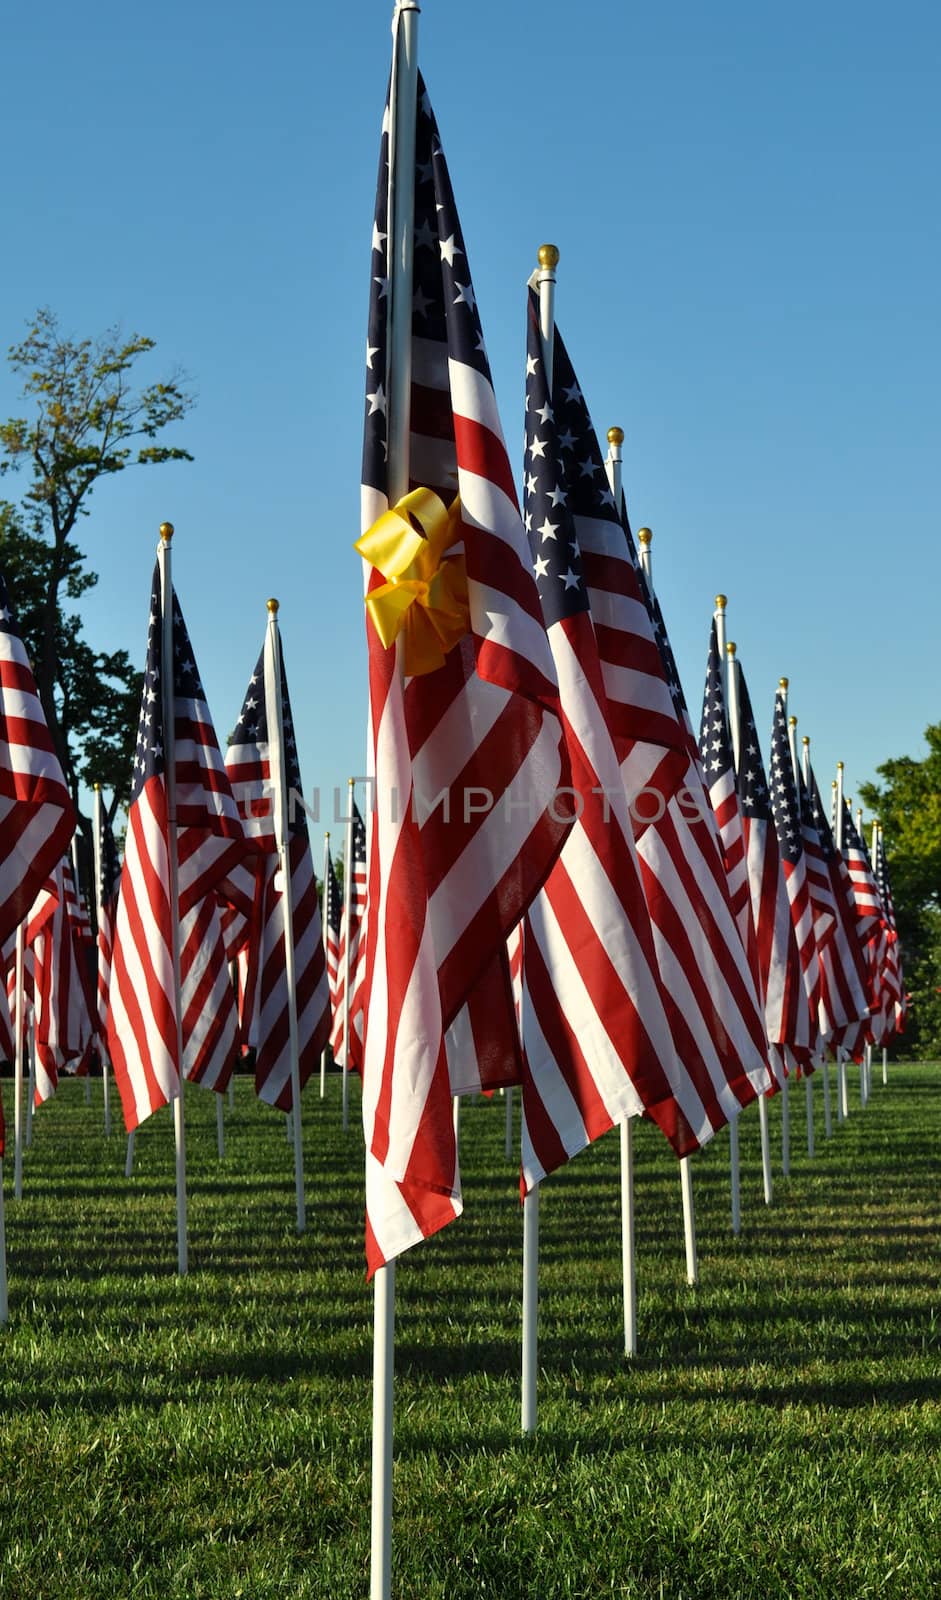 American Flags all in a row